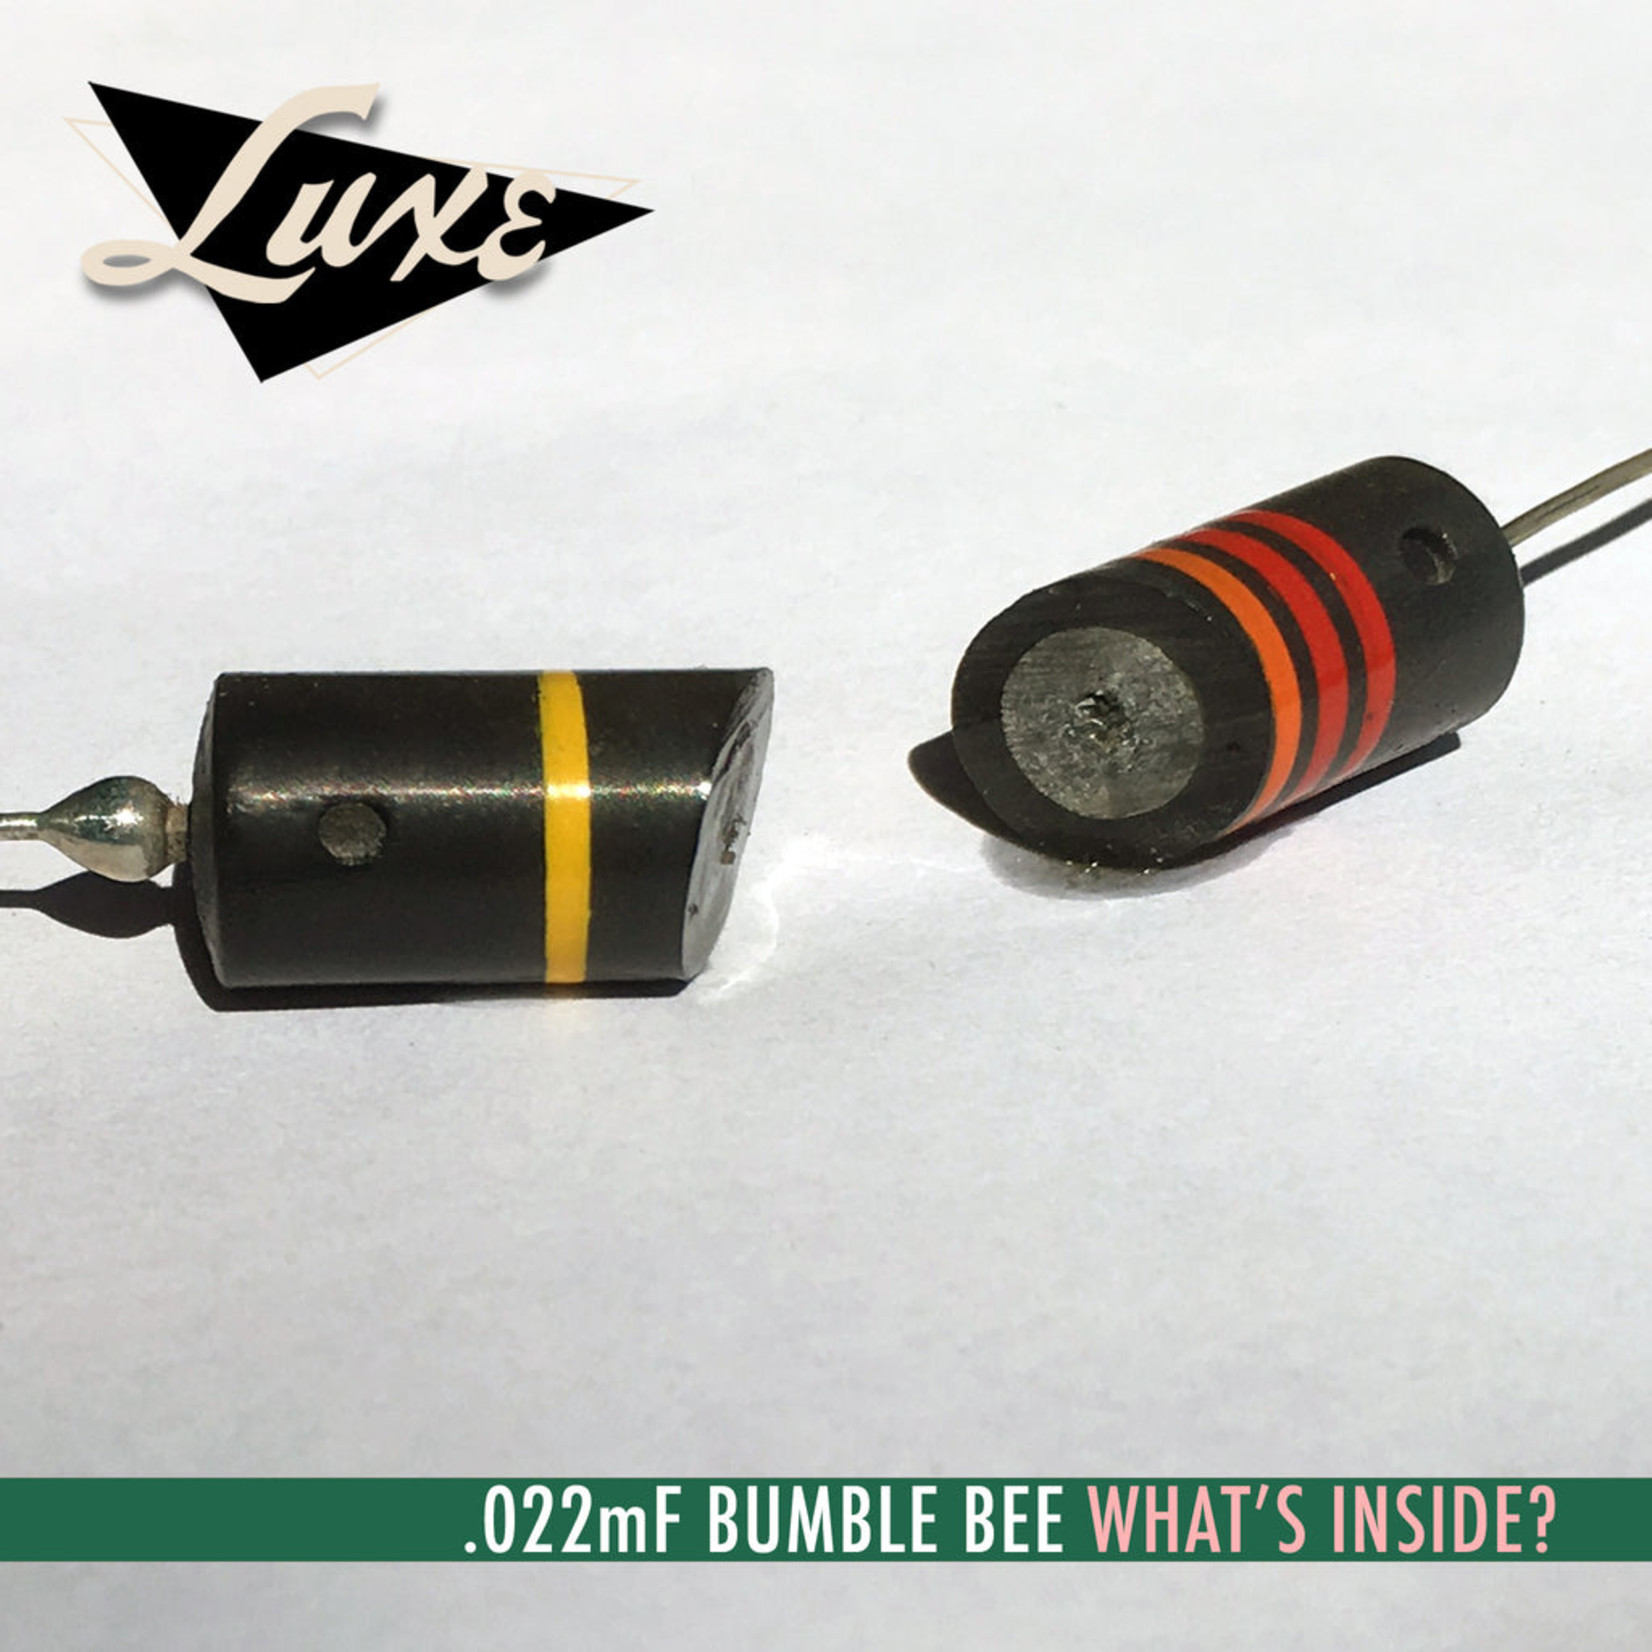 Luxe Radio Luxe 1956-1960 Matched Pair of Luxe Oil-Filled .022mF Bumblebee Capacitors